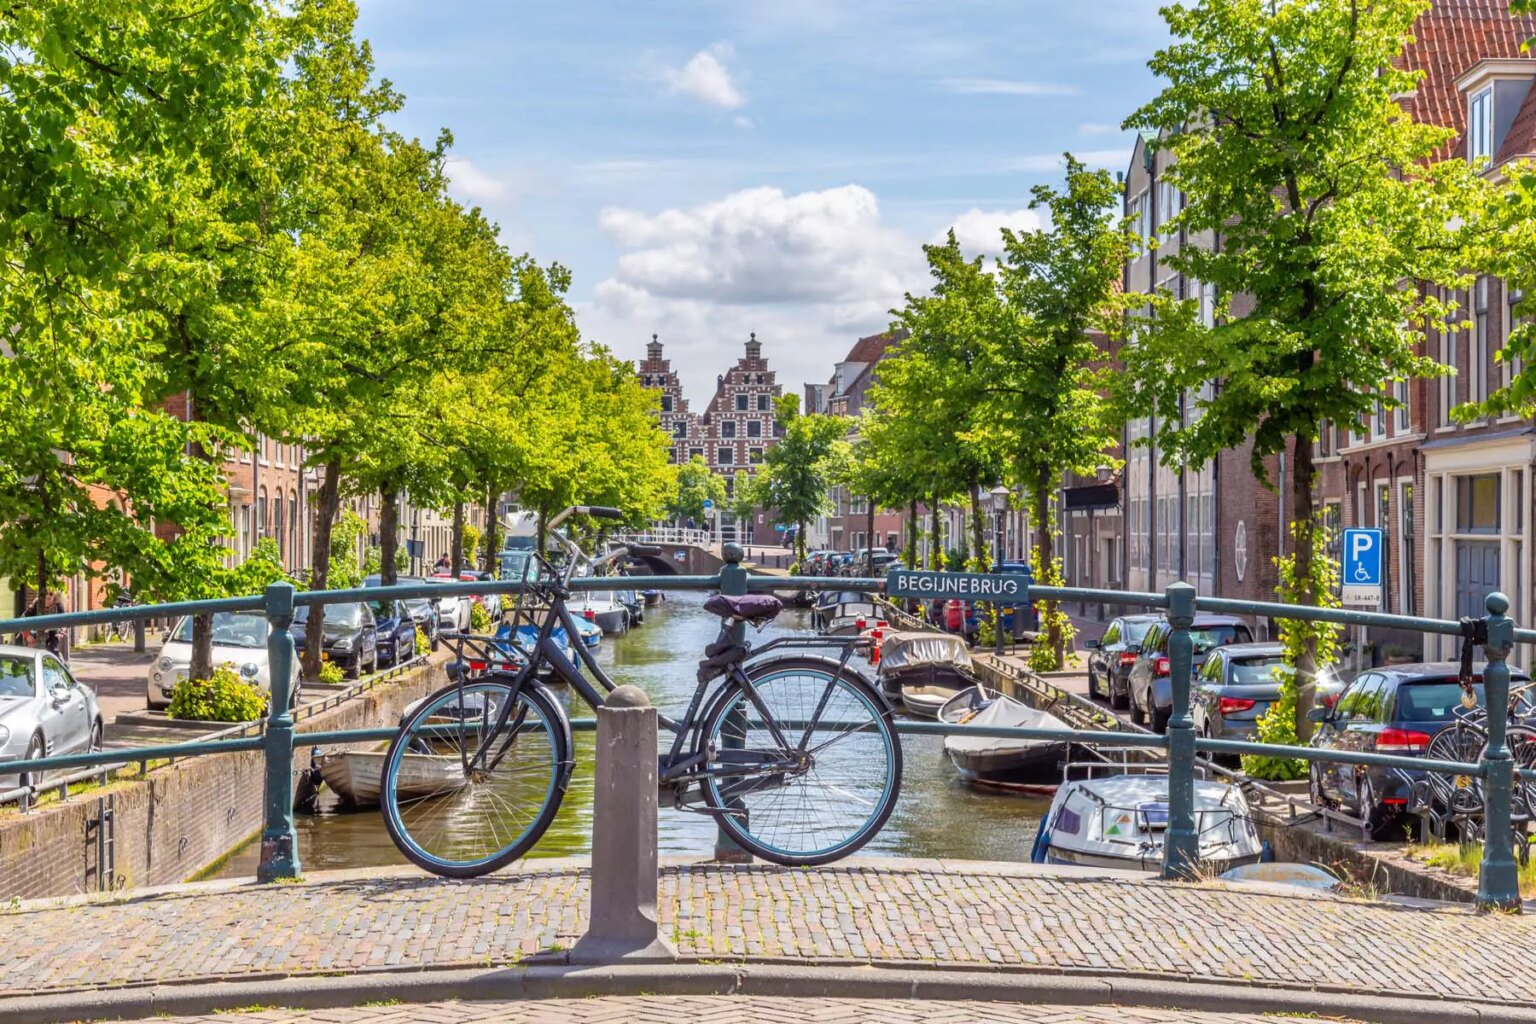 Cities close to Amsterdam